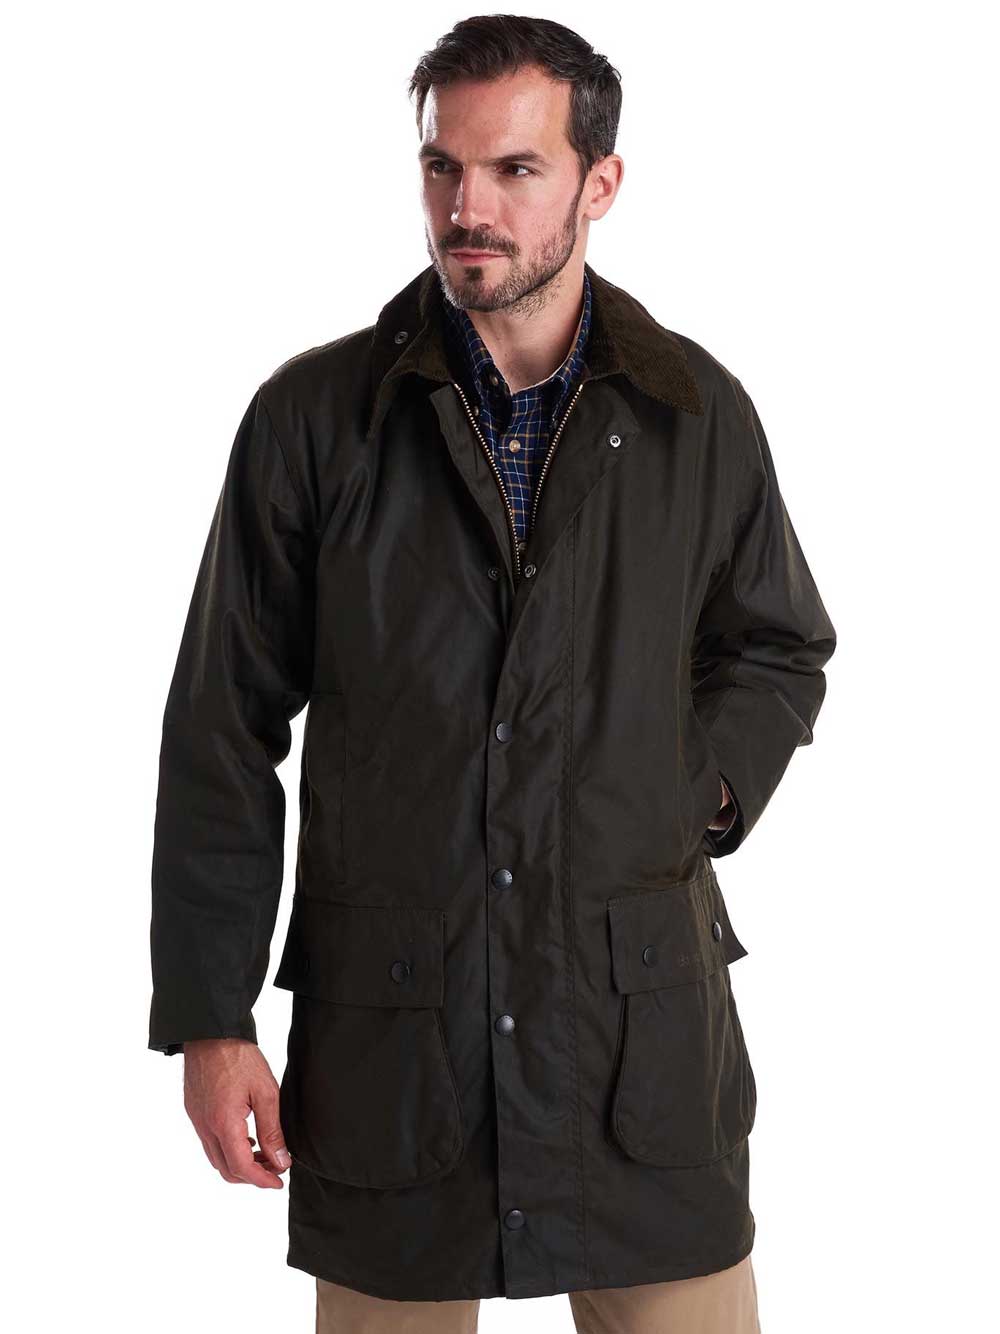 25% OFF BARBOUR Classic Northumbria Wax Jacket - Mens 8oz Sylkoil - Olive